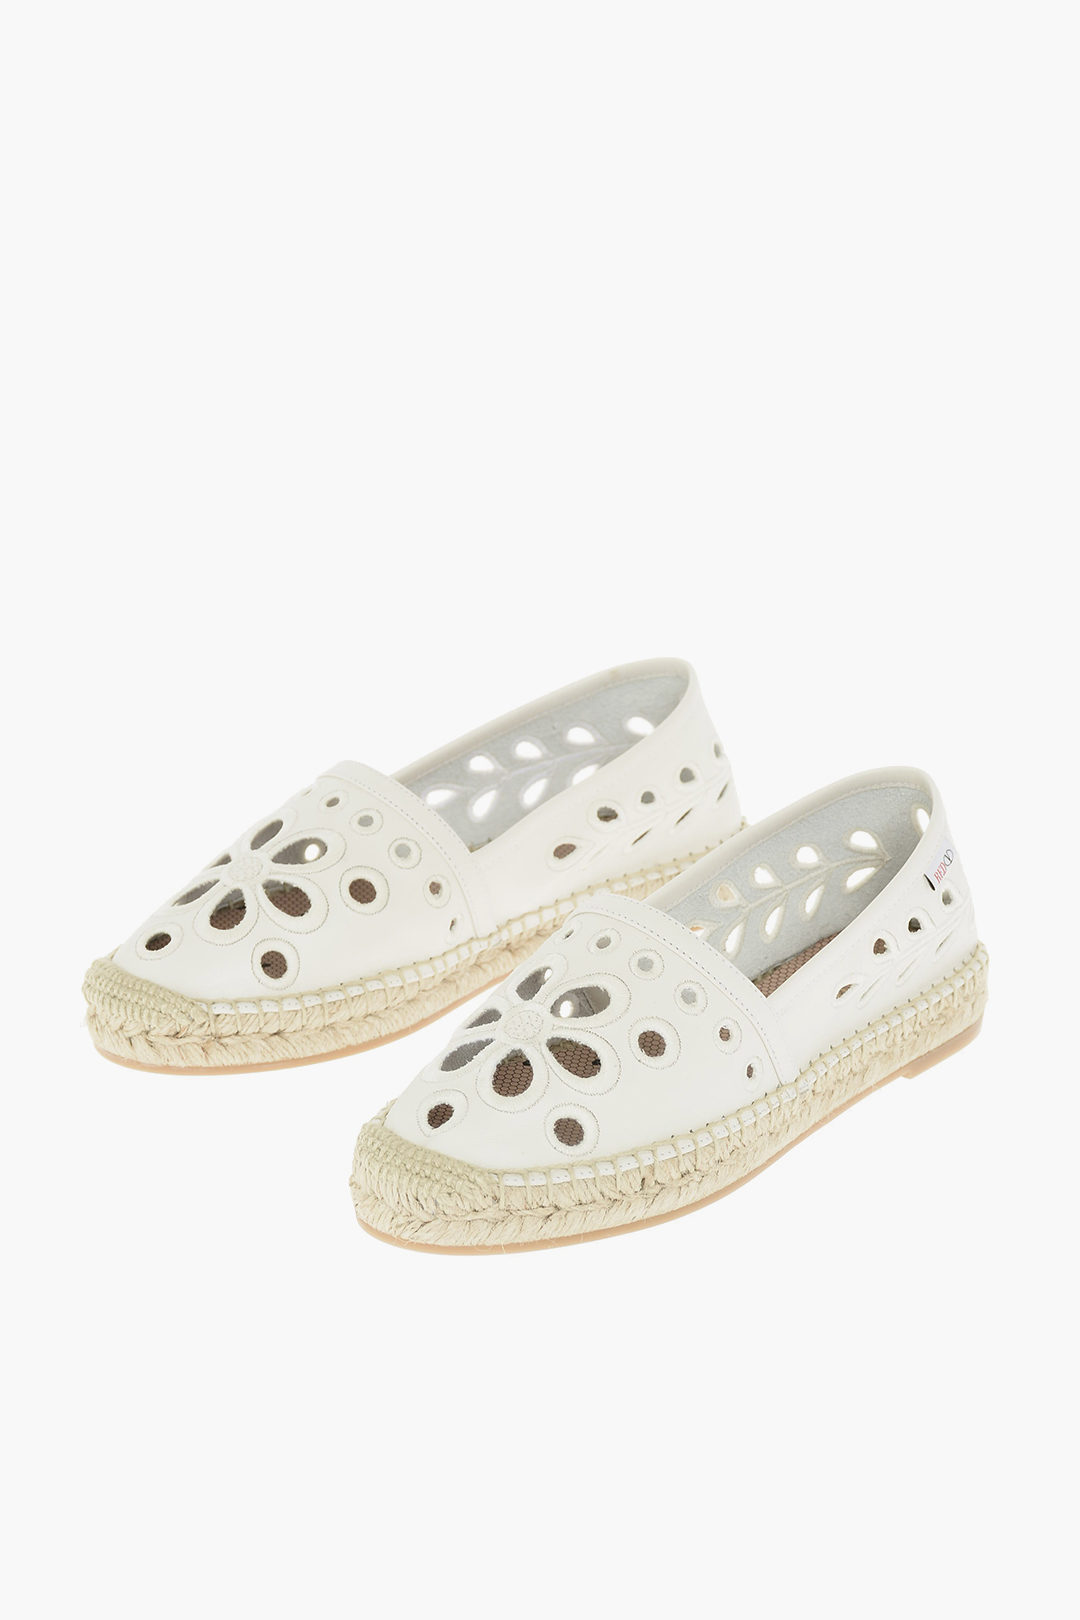 Red Valentino Soft Espadrilles with Embroidered Floral Cut-outs women - Glamood Outlet